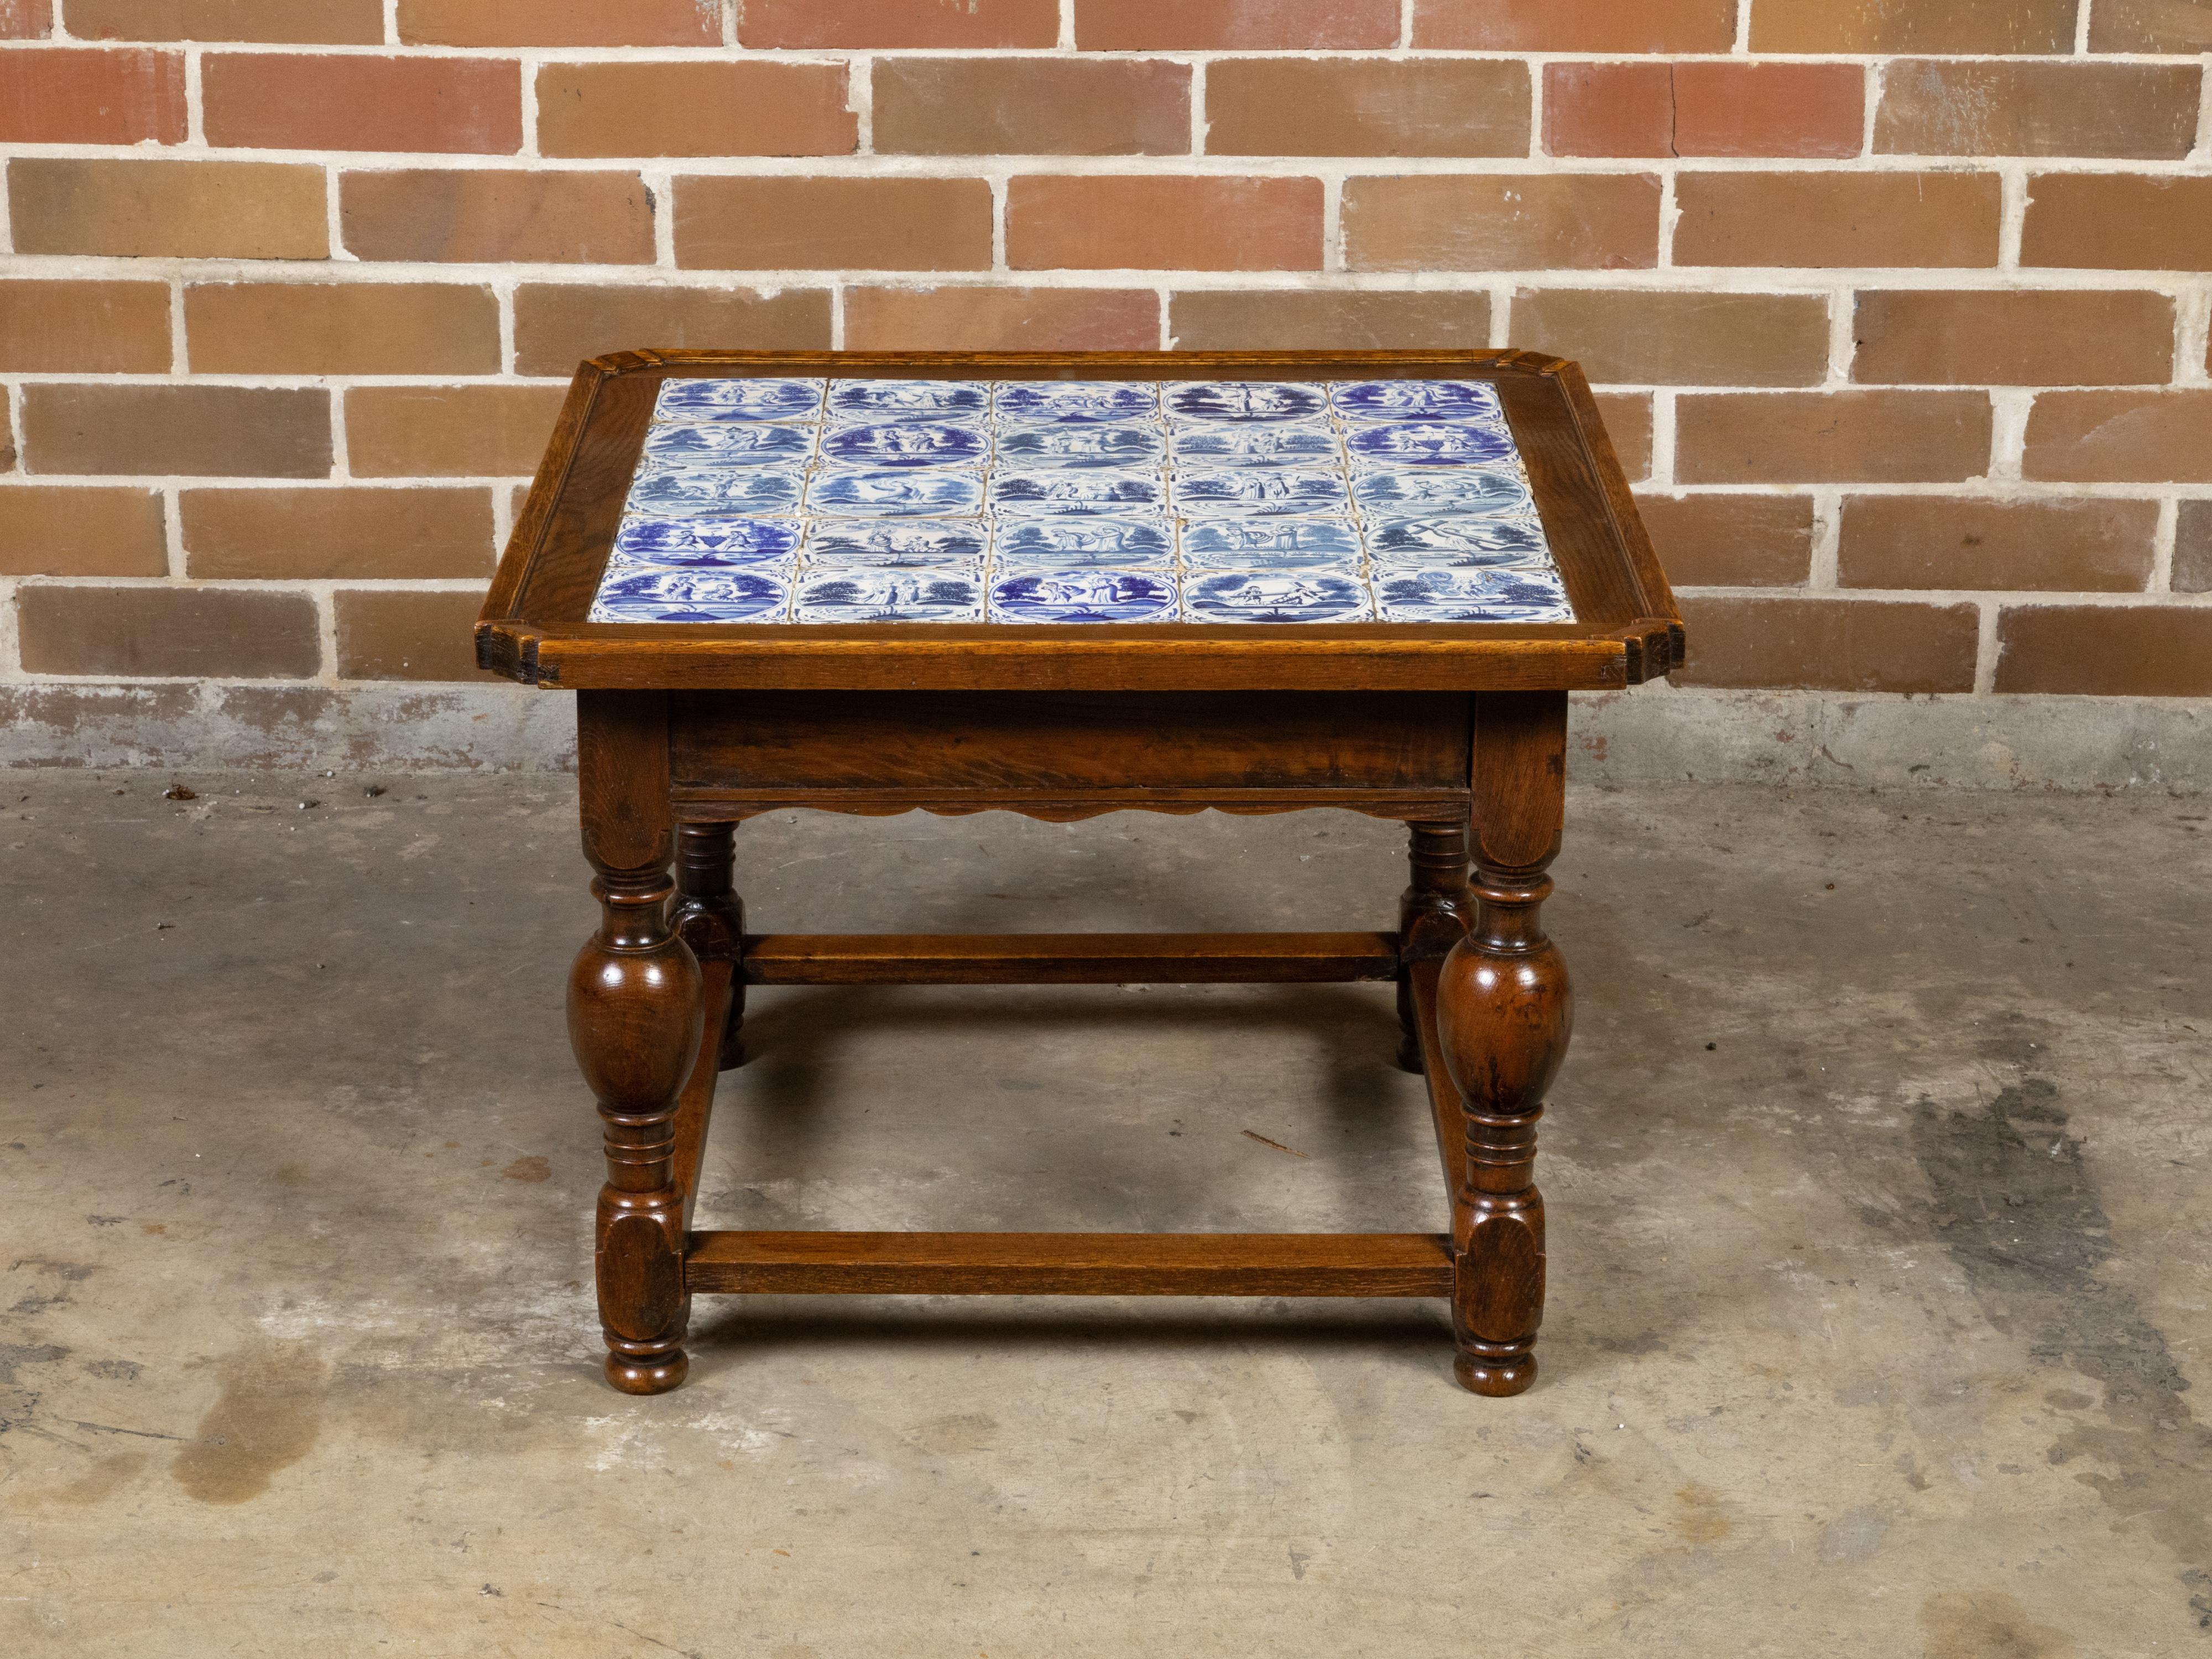 An English oak drinks table from the 19th century with blue and white Delft tiles top depicting religious scenes, and resting on turned legs. Created in England during the 19th century, this oak drinks table features a square top beautifully adorned